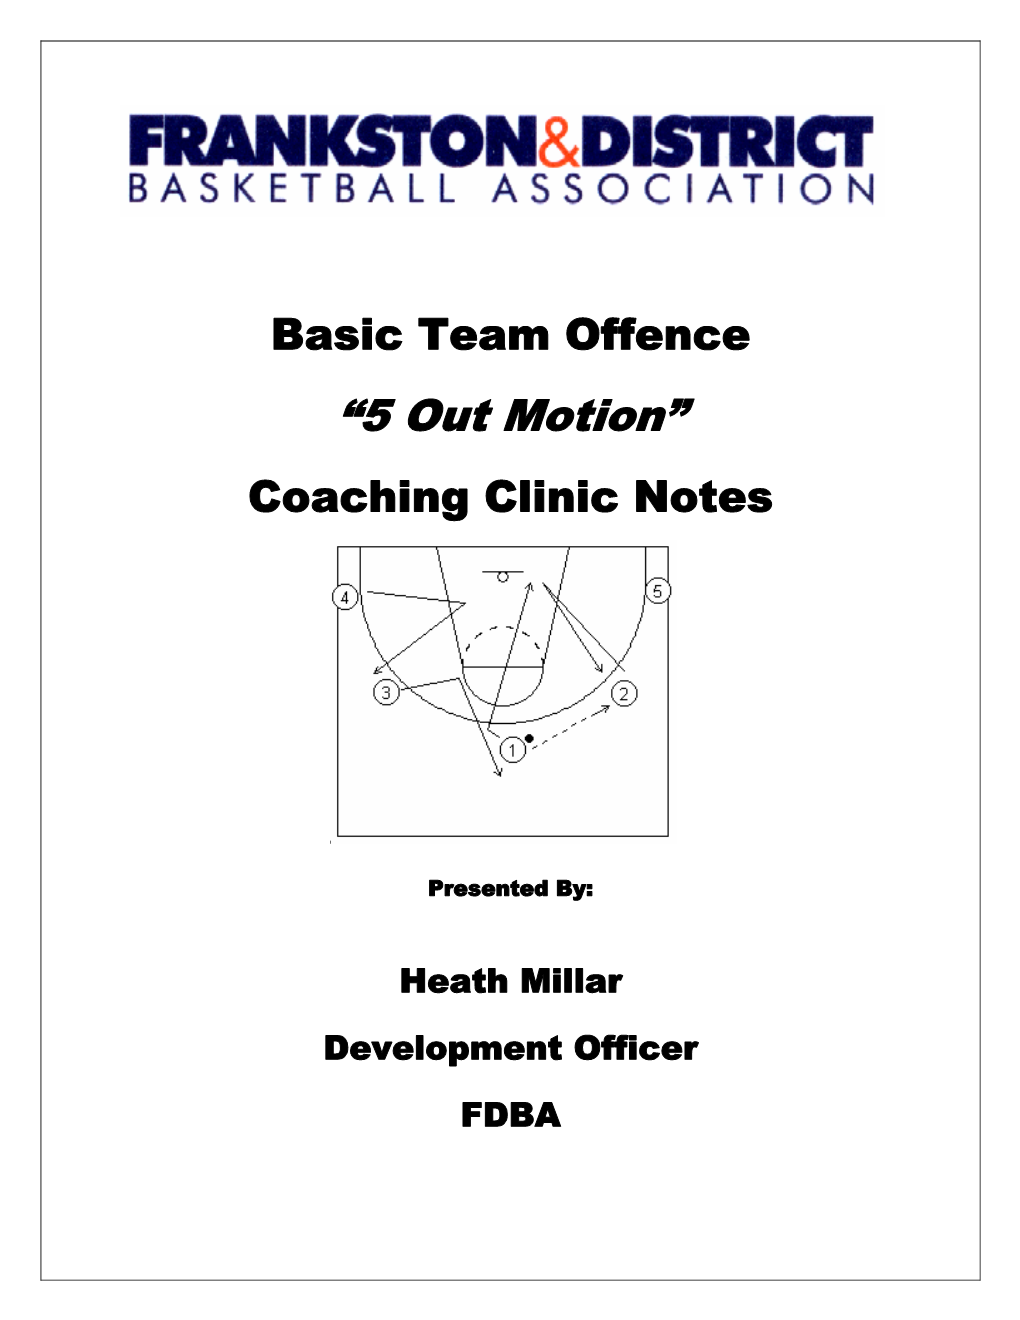 “5 out Motion” Coaching Clinic Notes